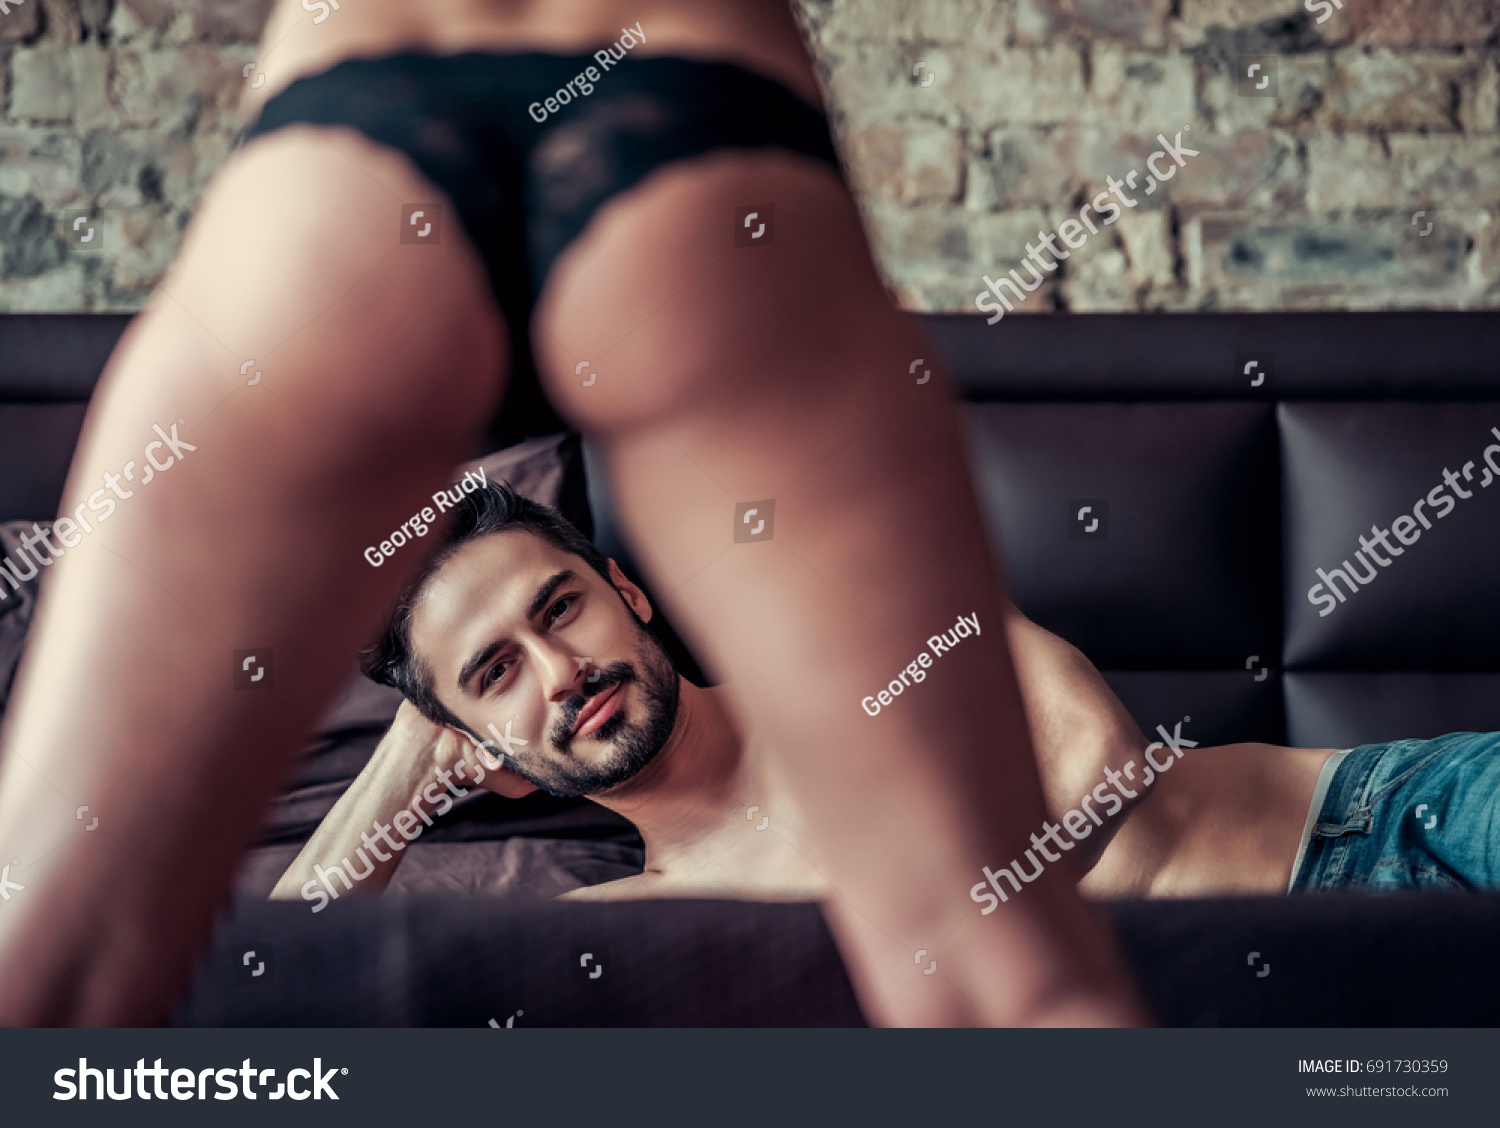 Couple having sex. Handsome man is lying on bed and looking at camera between woman's legs #691730359